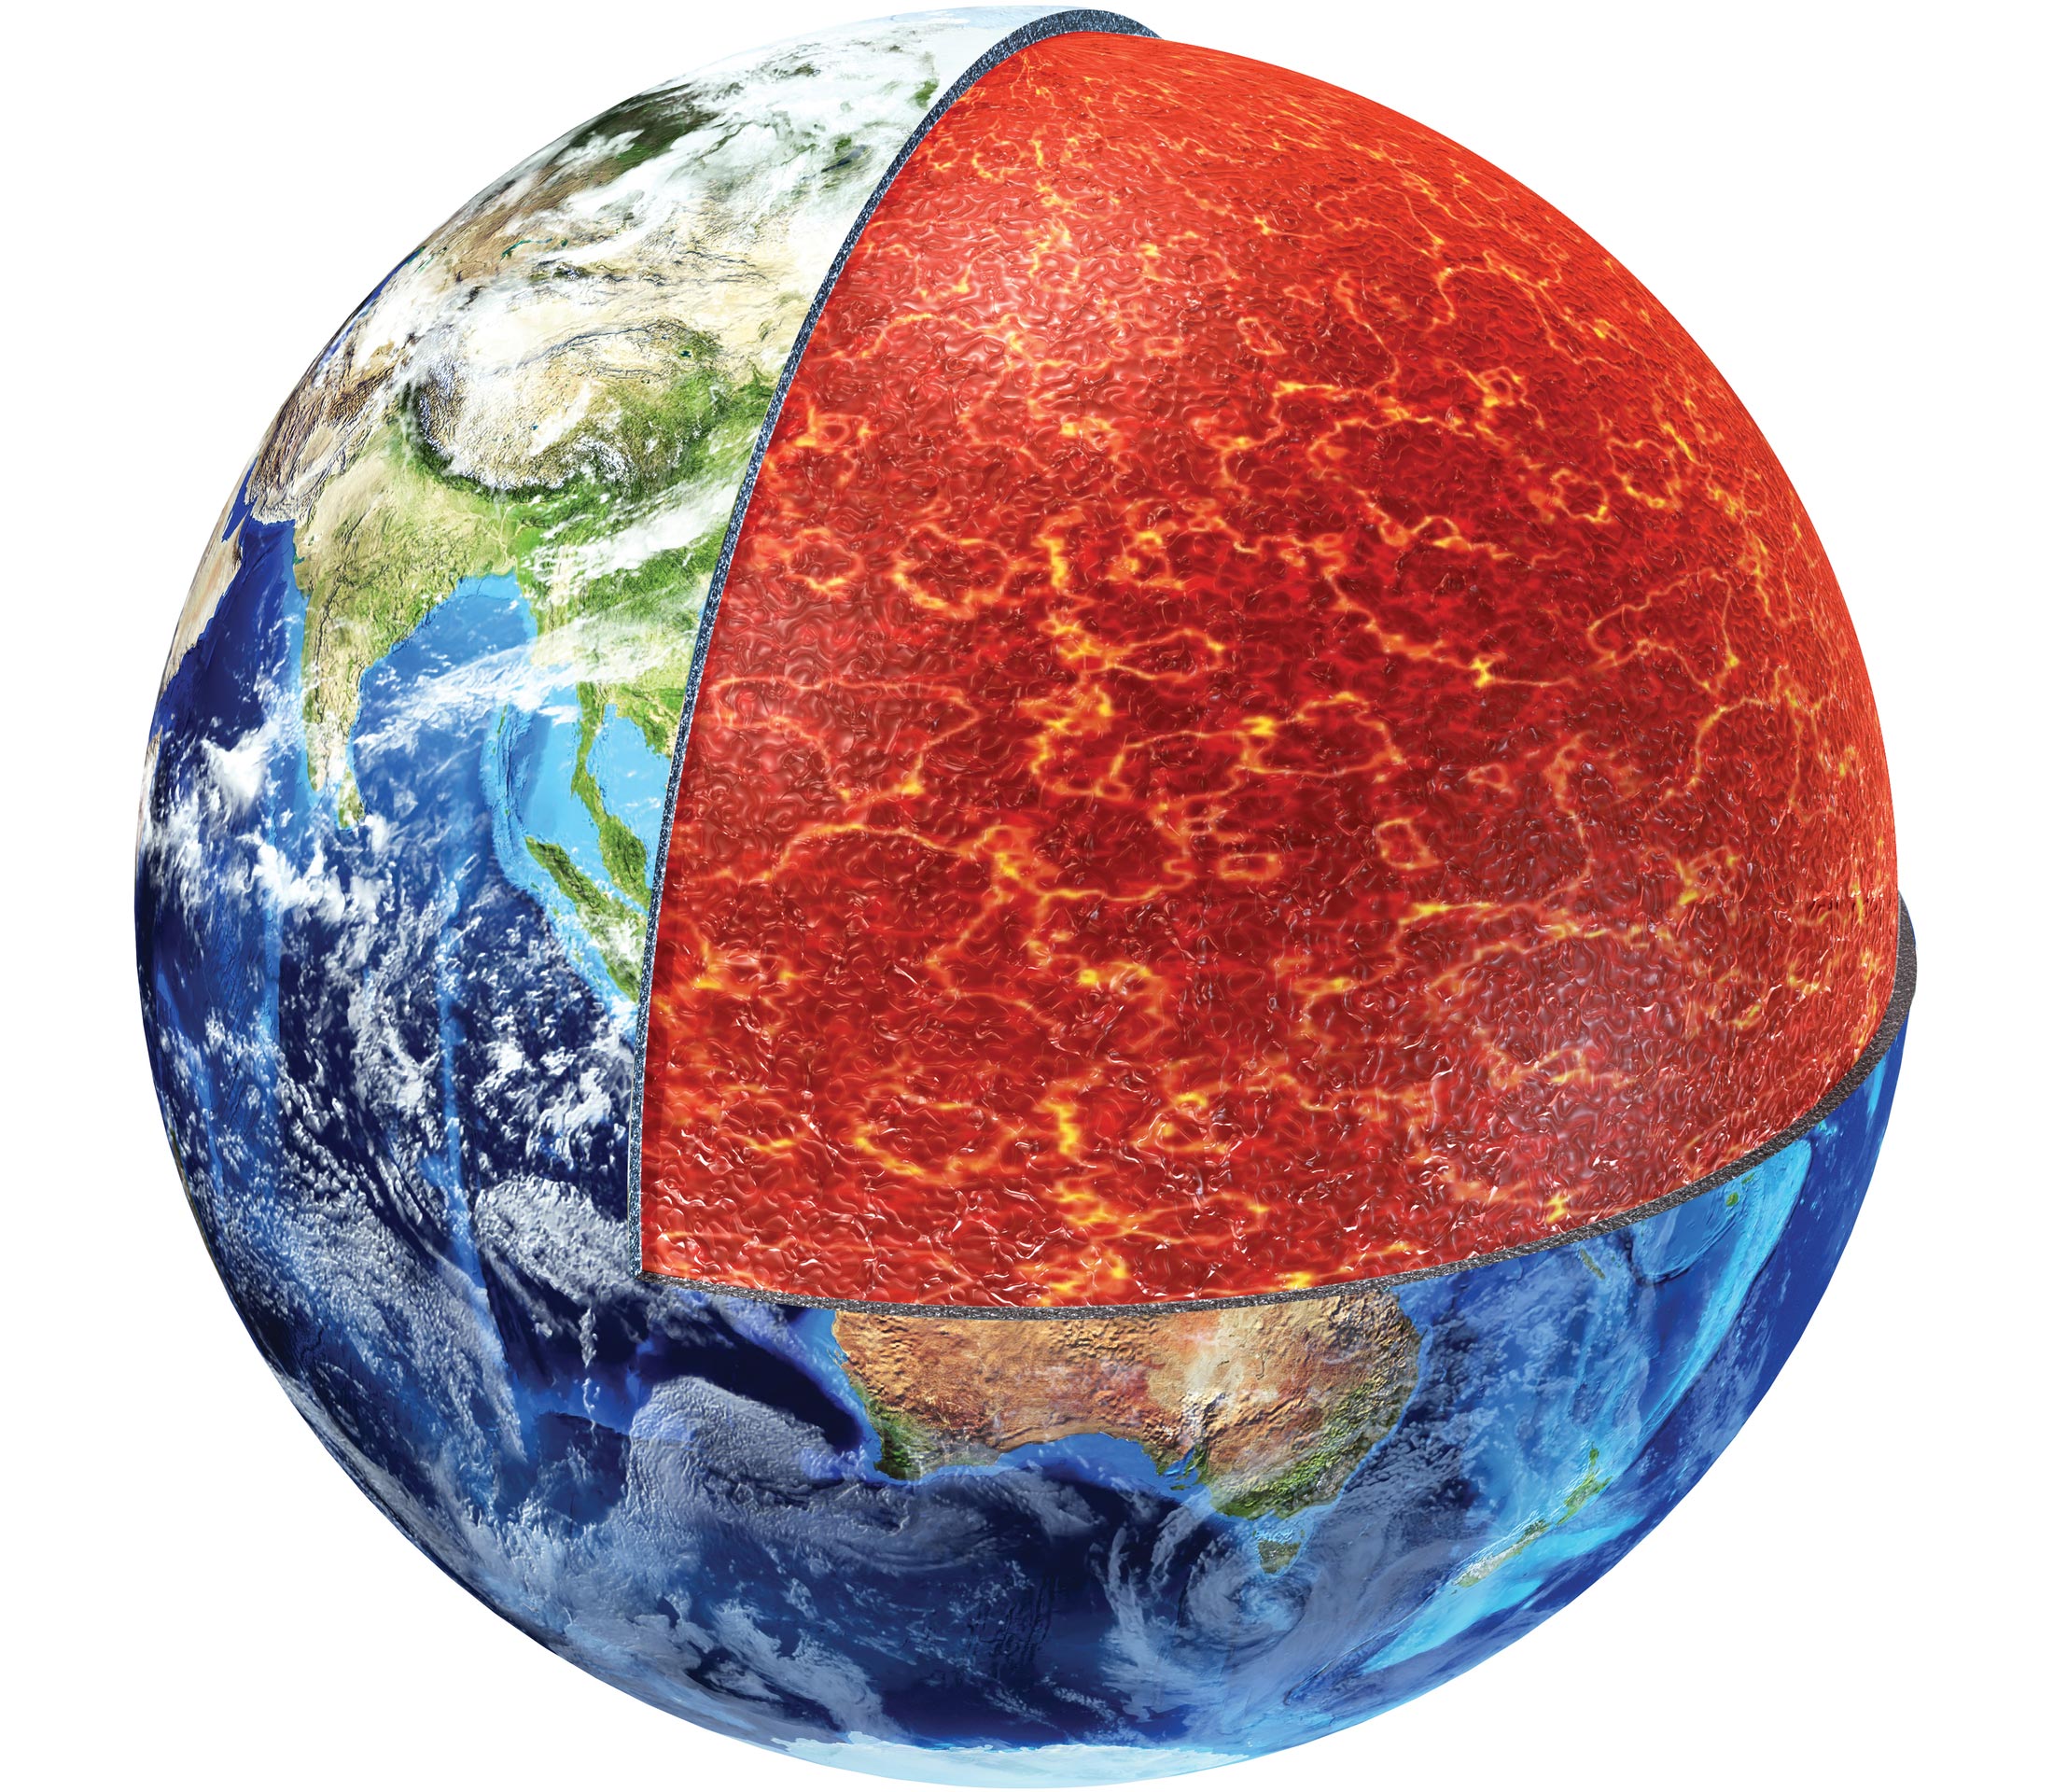 Groundbreaking Discovery of Hidden Molten Rock Layer Under Earth's Tectonic Plates - SciTechDaily